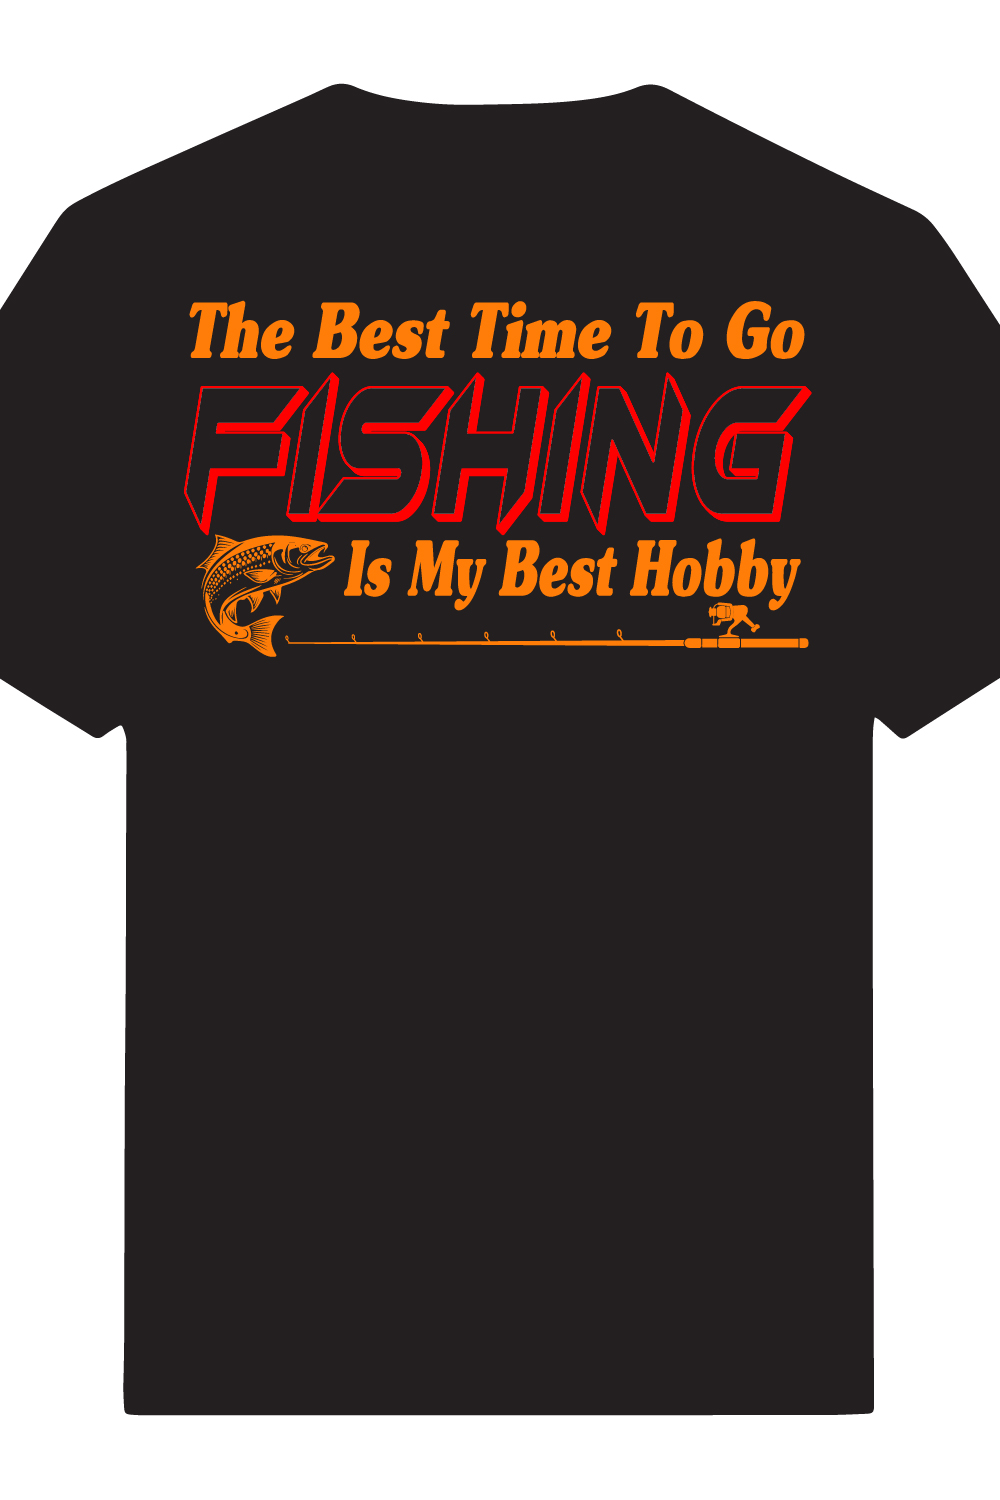 The best time to go FISHING is my best hobby typography t-shirt